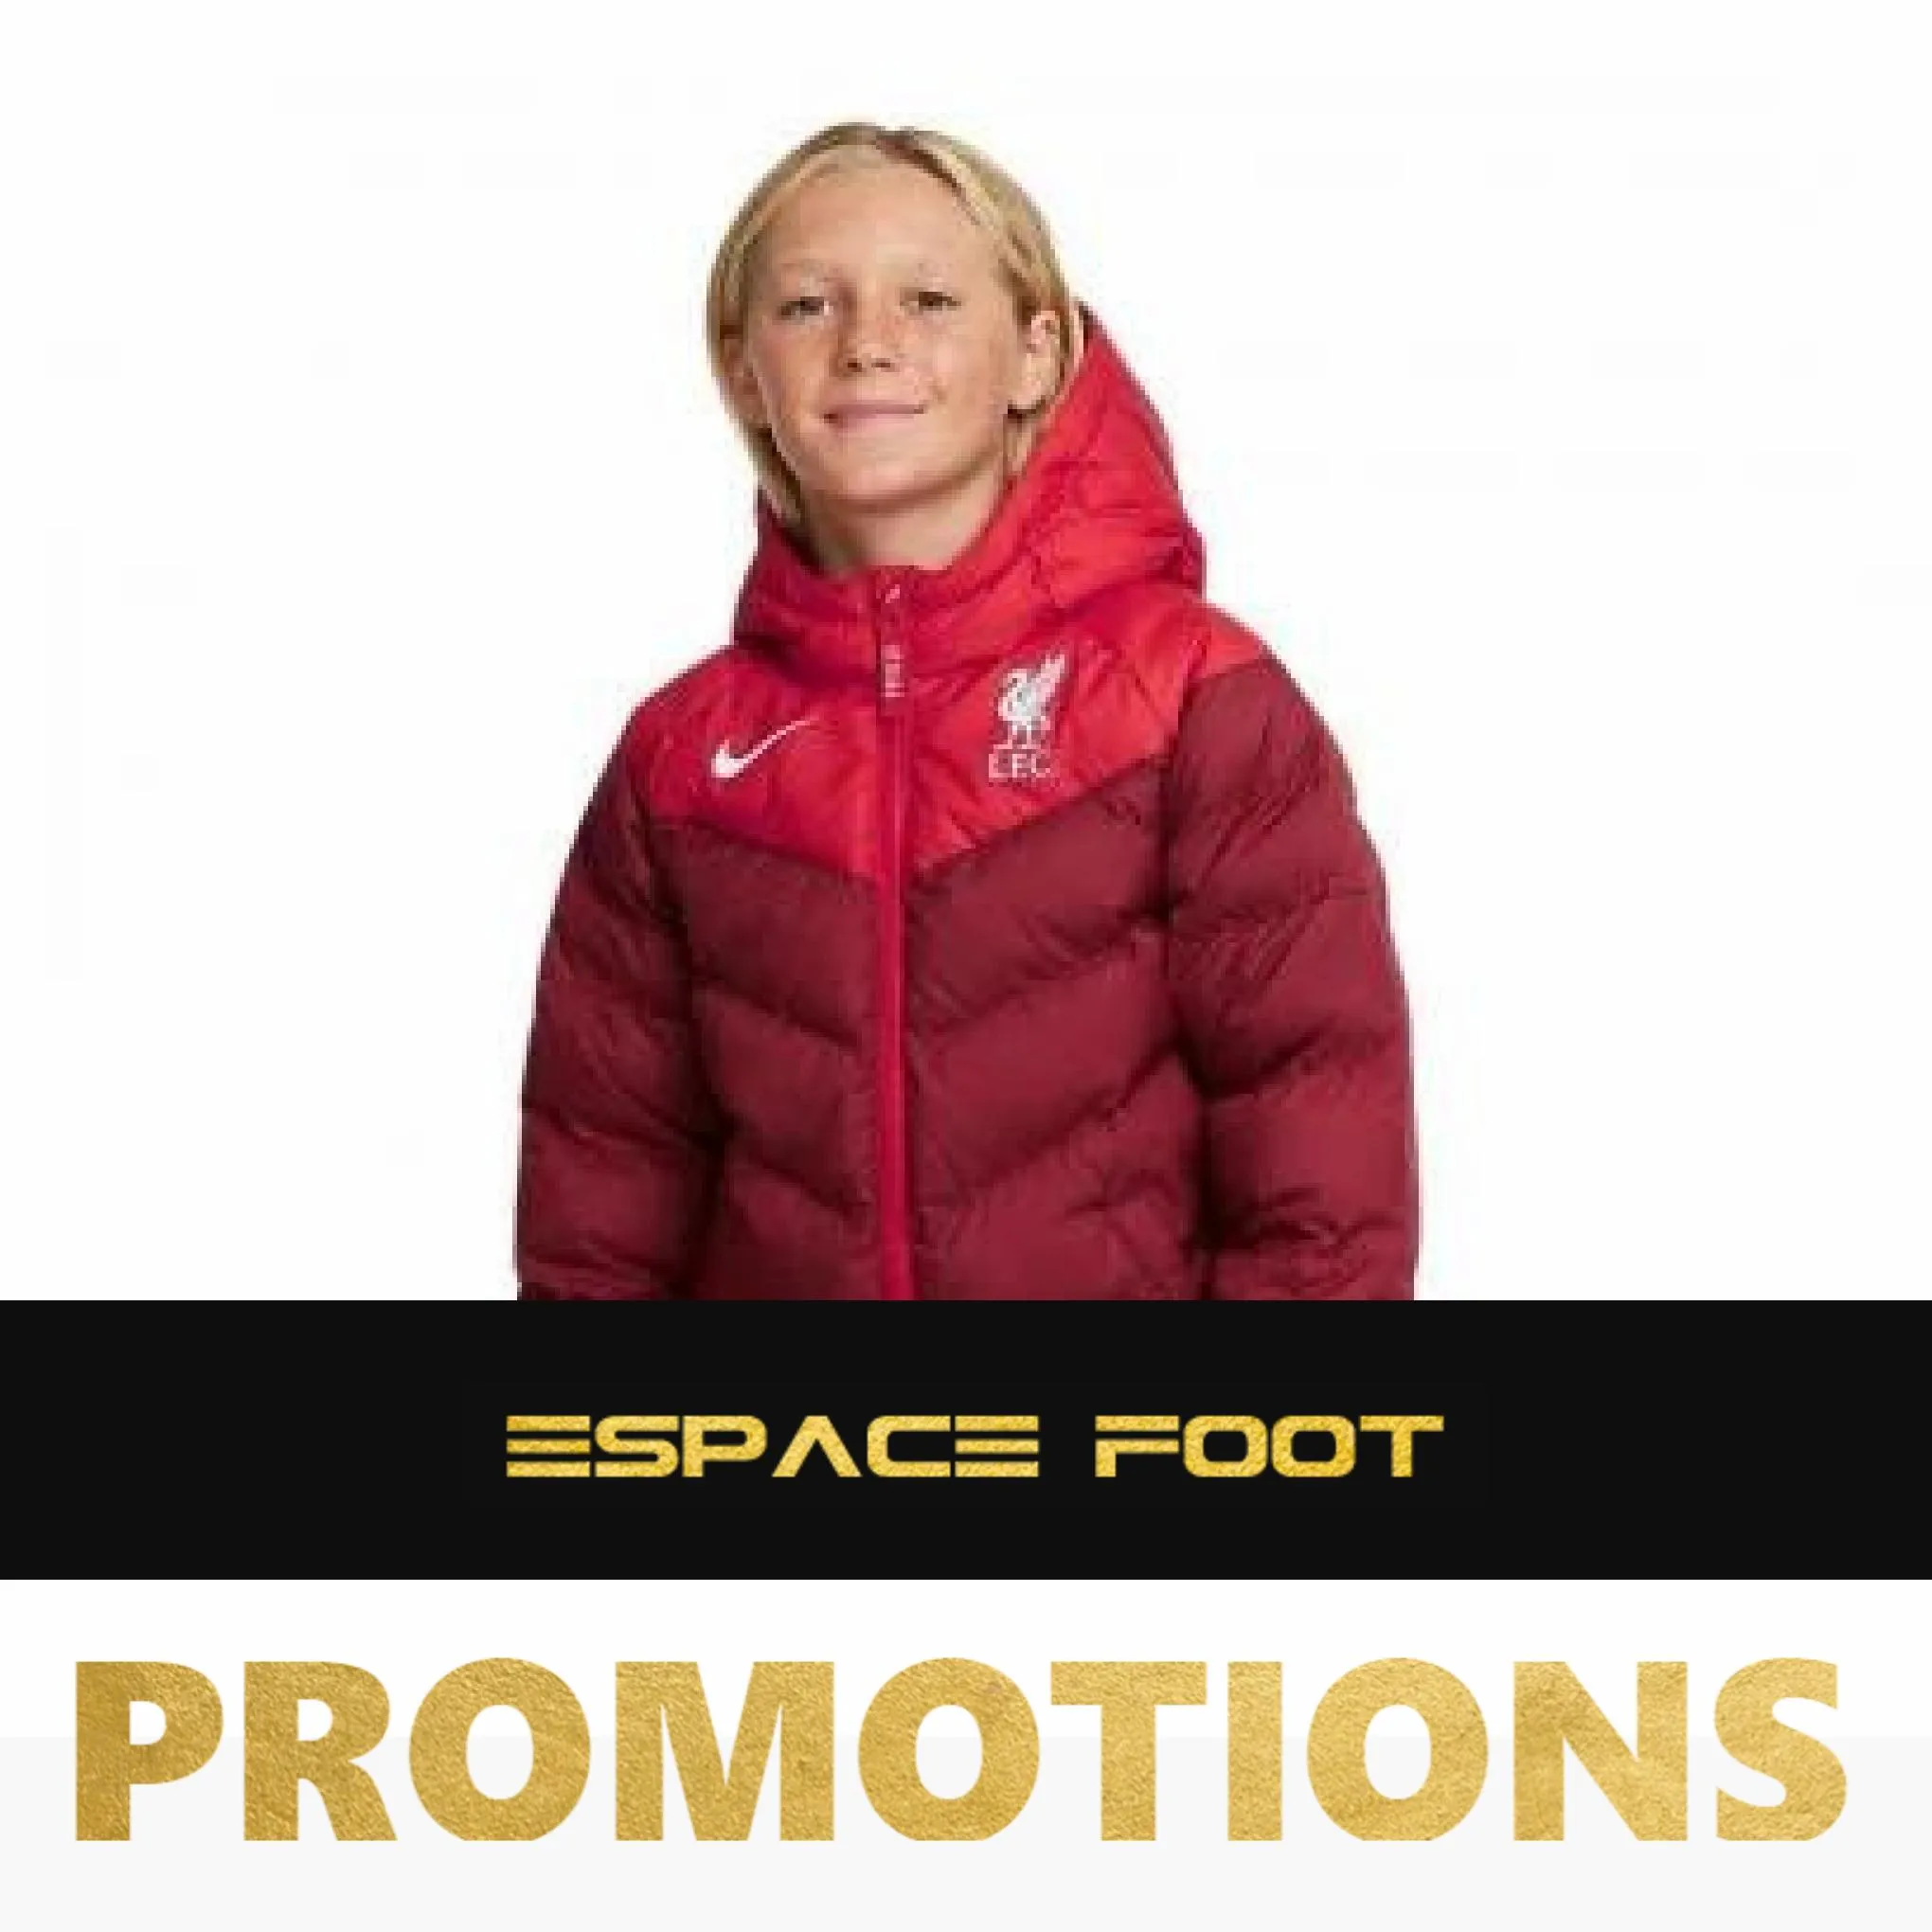 Catalogue Space Foot Promotions, page 00001